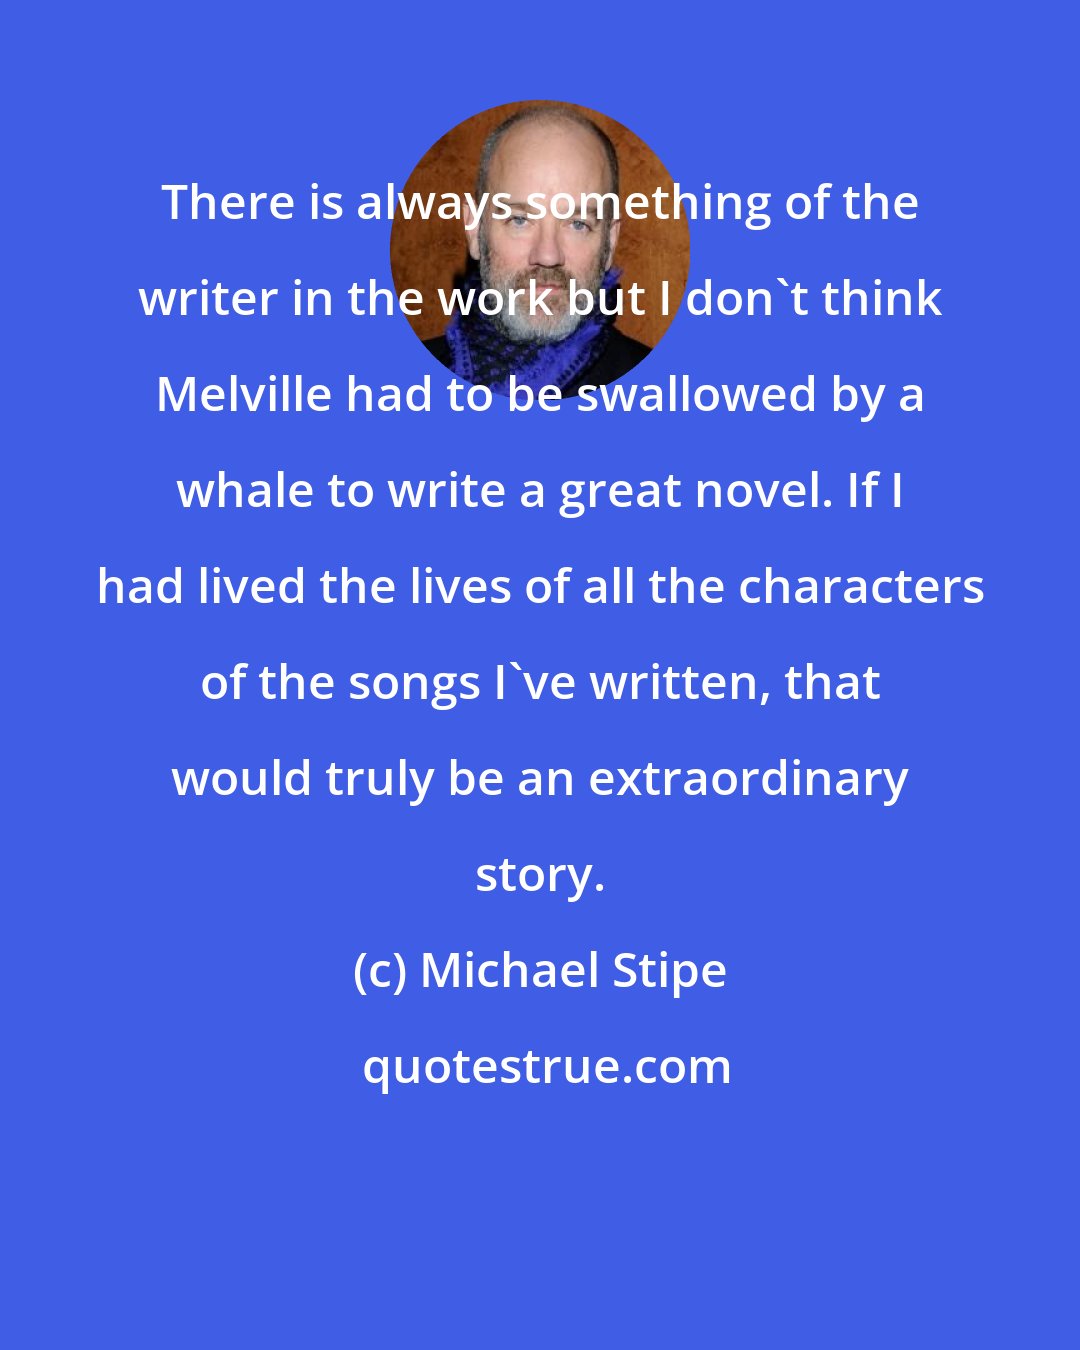 Michael Stipe: There is always something of the writer in the work but I don't think Melville had to be swallowed by a whale to write a great novel. If I had lived the lives of all the characters of the songs I've written, that would truly be an extraordinary story.